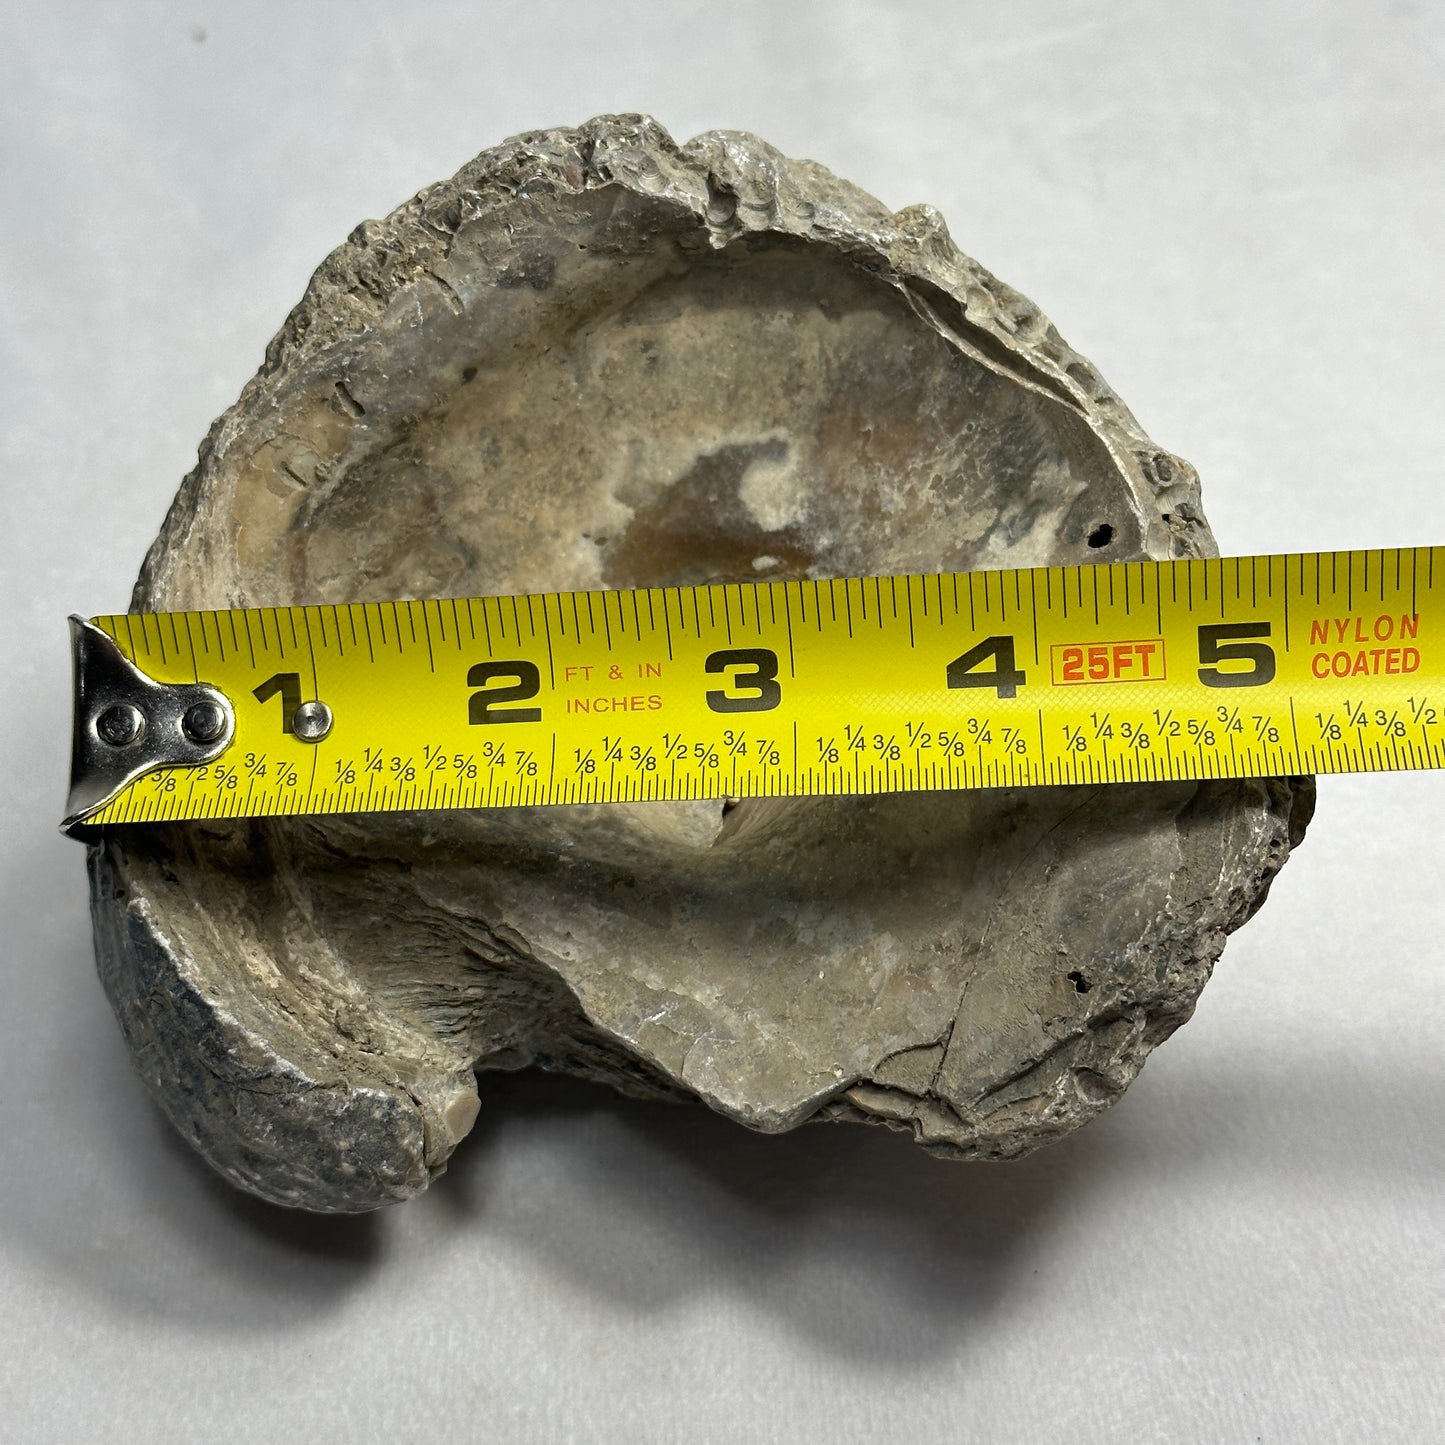 6" Fossilized Oyster